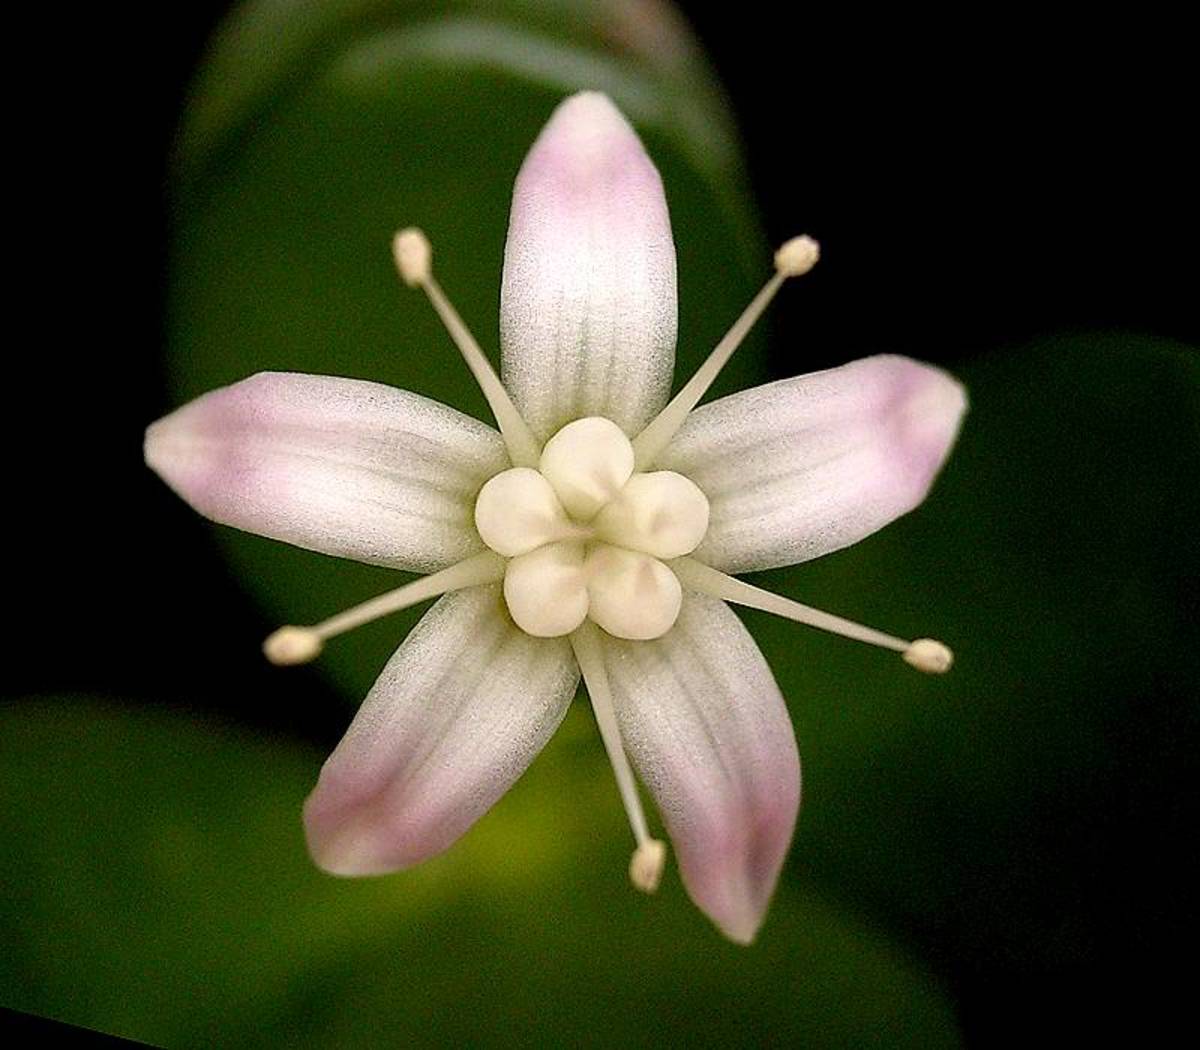 Flower of the jade plant